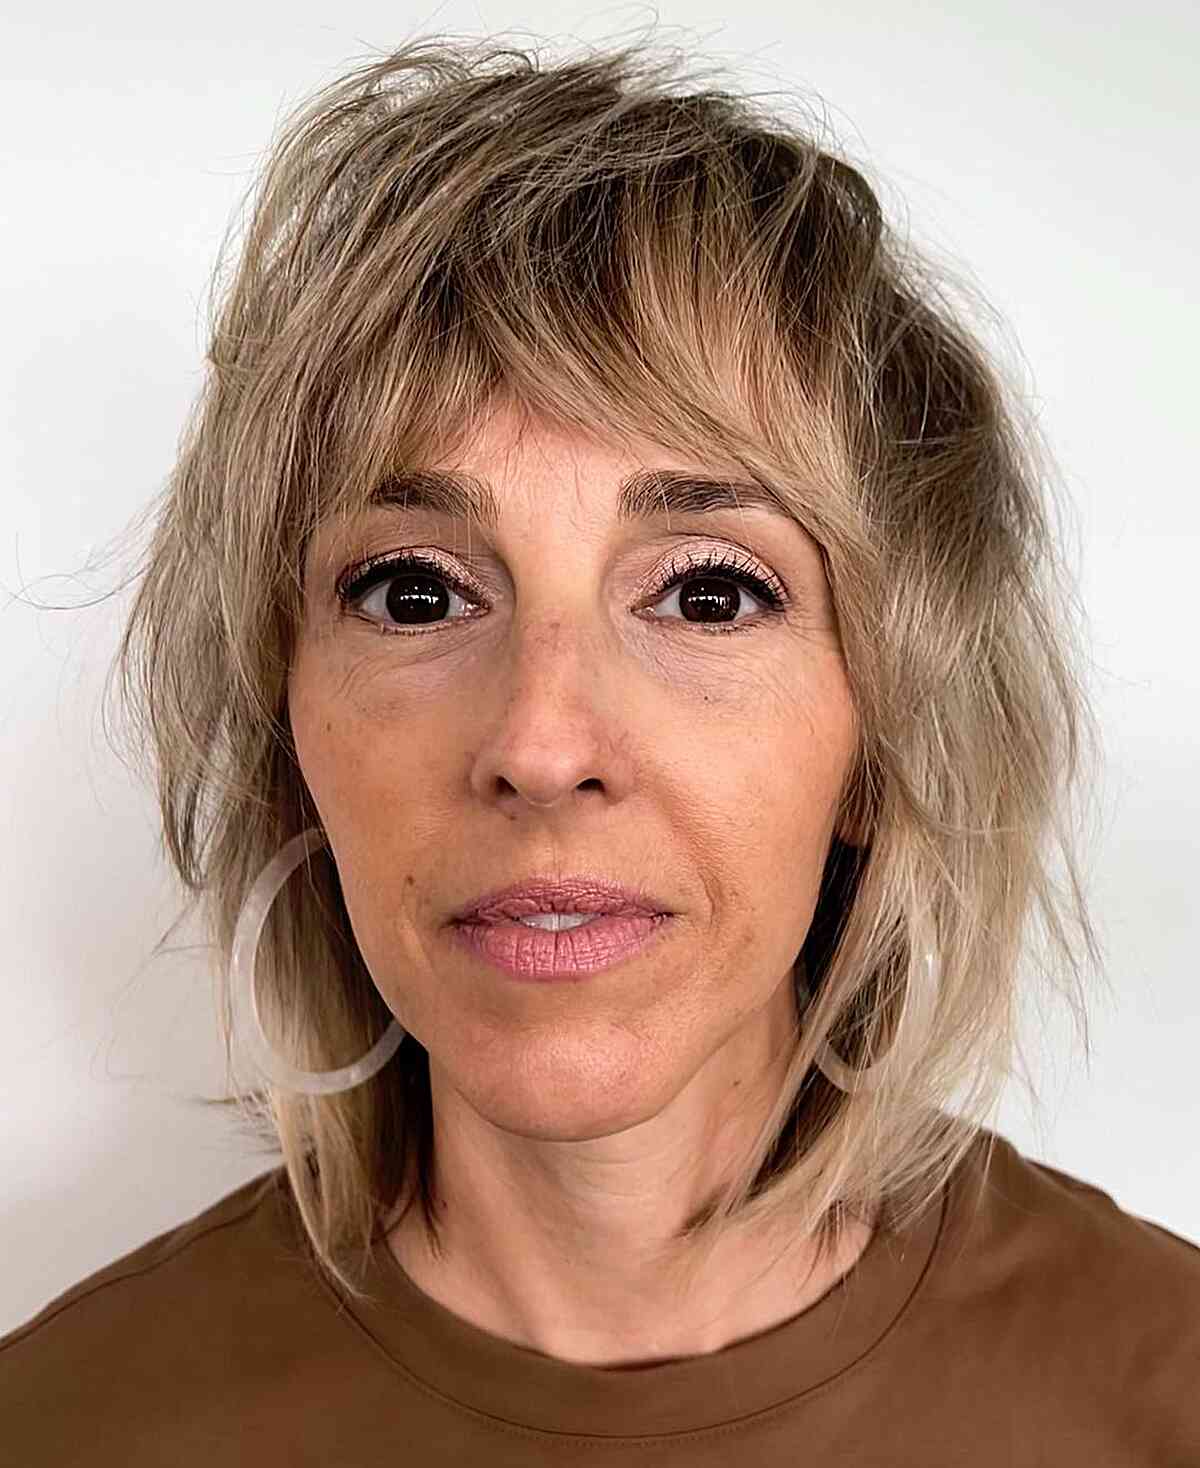 Shoulder-Grazing Tousled Shaggy Long Bob with Bangs for Ladies in Their 50s with Fine Hair